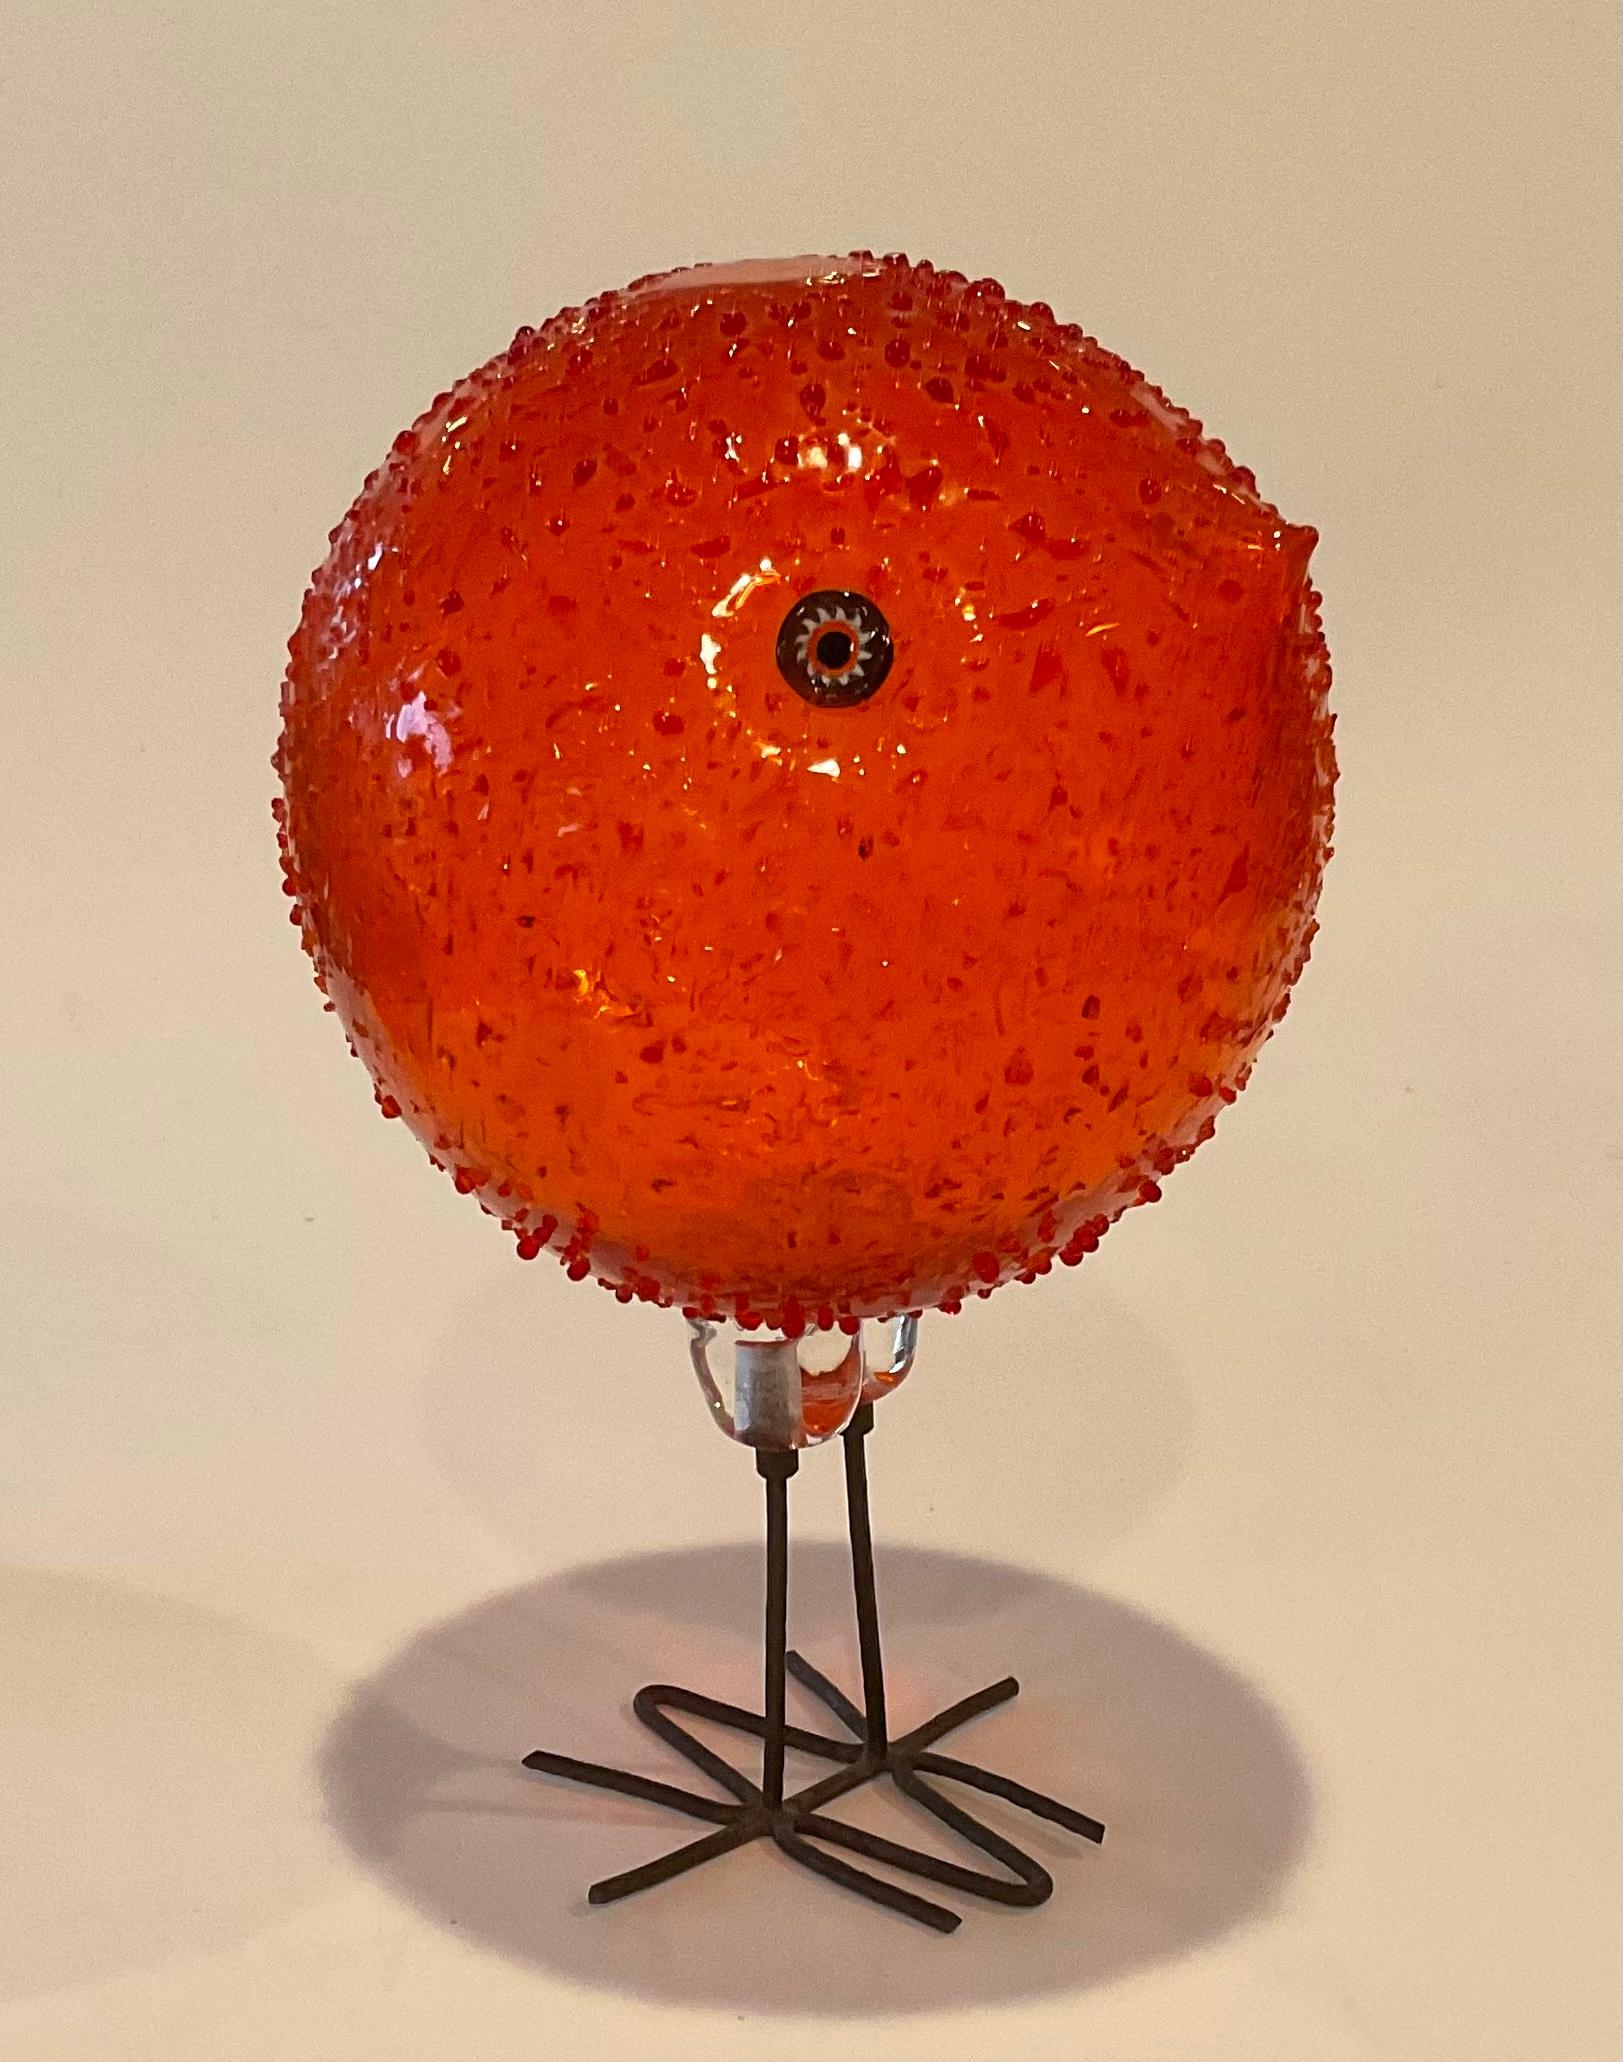 Iconic Murano glass bird designed by Alessandro Pianon for Vistosi circa 1960’s. 
Amazing design with its original copper legs. Not very many of these Vistosi birds available for sale in the world, as the demand far exceeds the supply. 
Will enhance